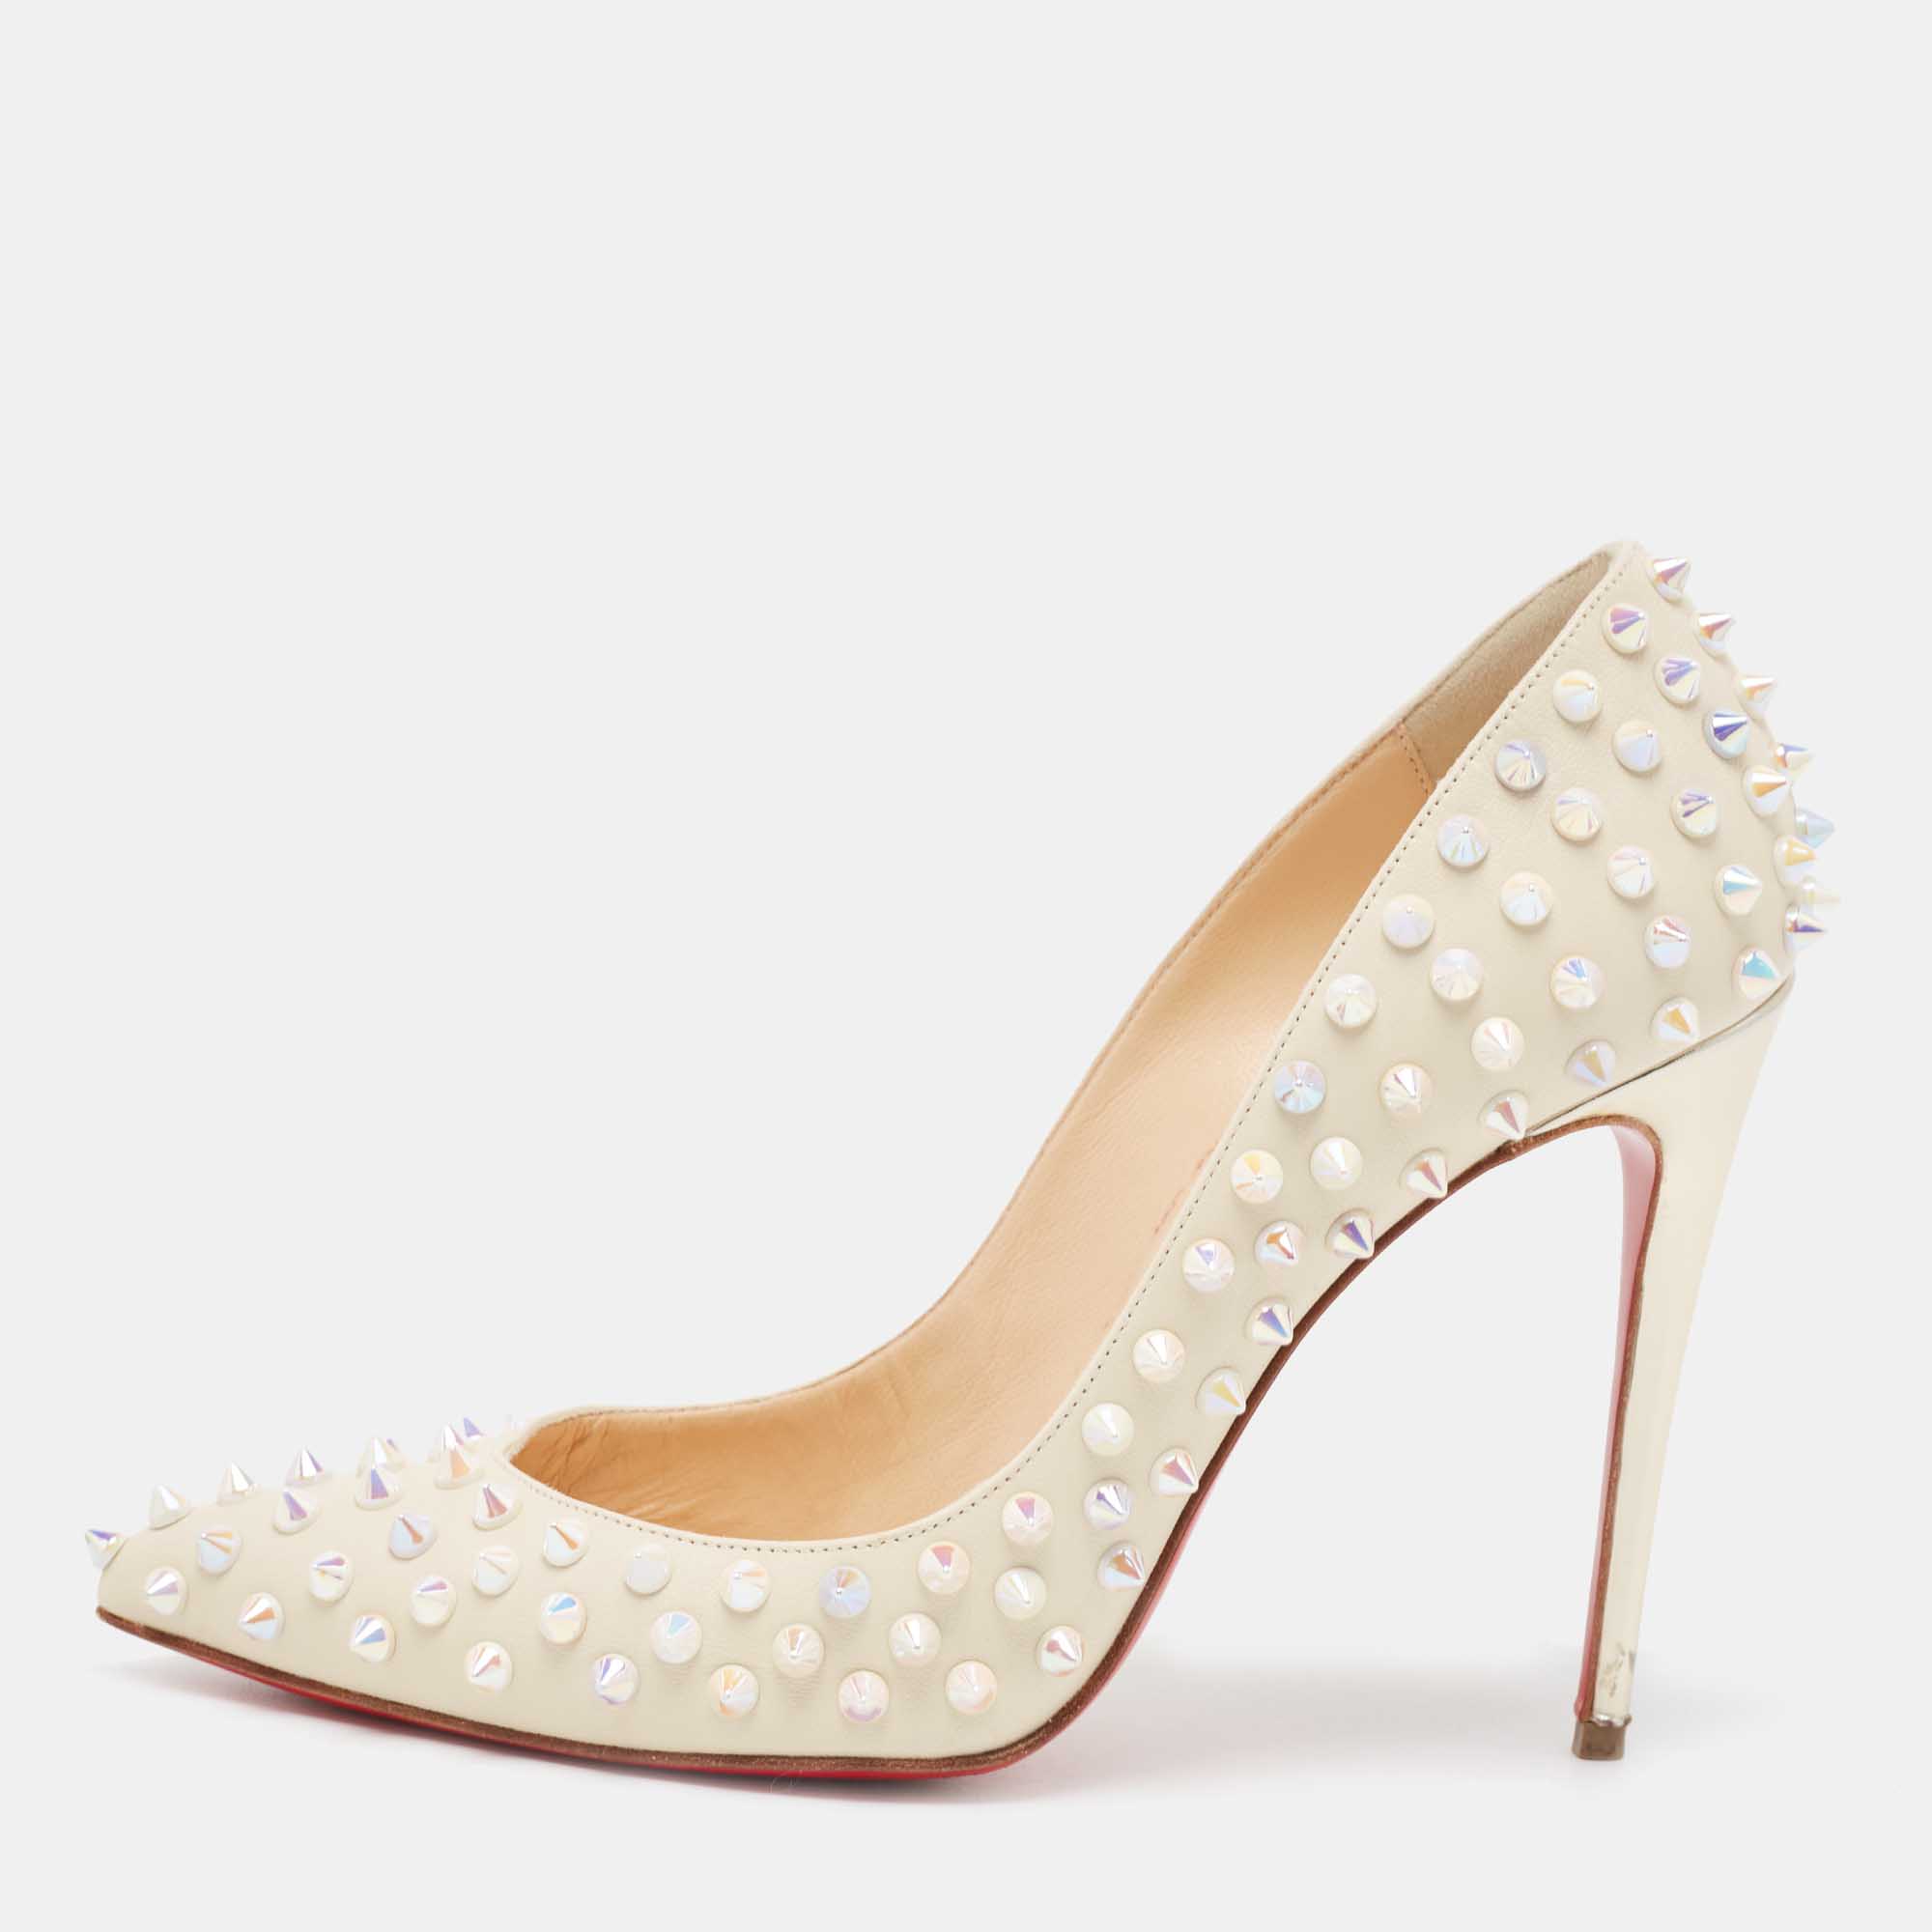 Pre-owned Christian Louboutin Cream Leather Follies Spikes Pointed Toe Pumps Size 38